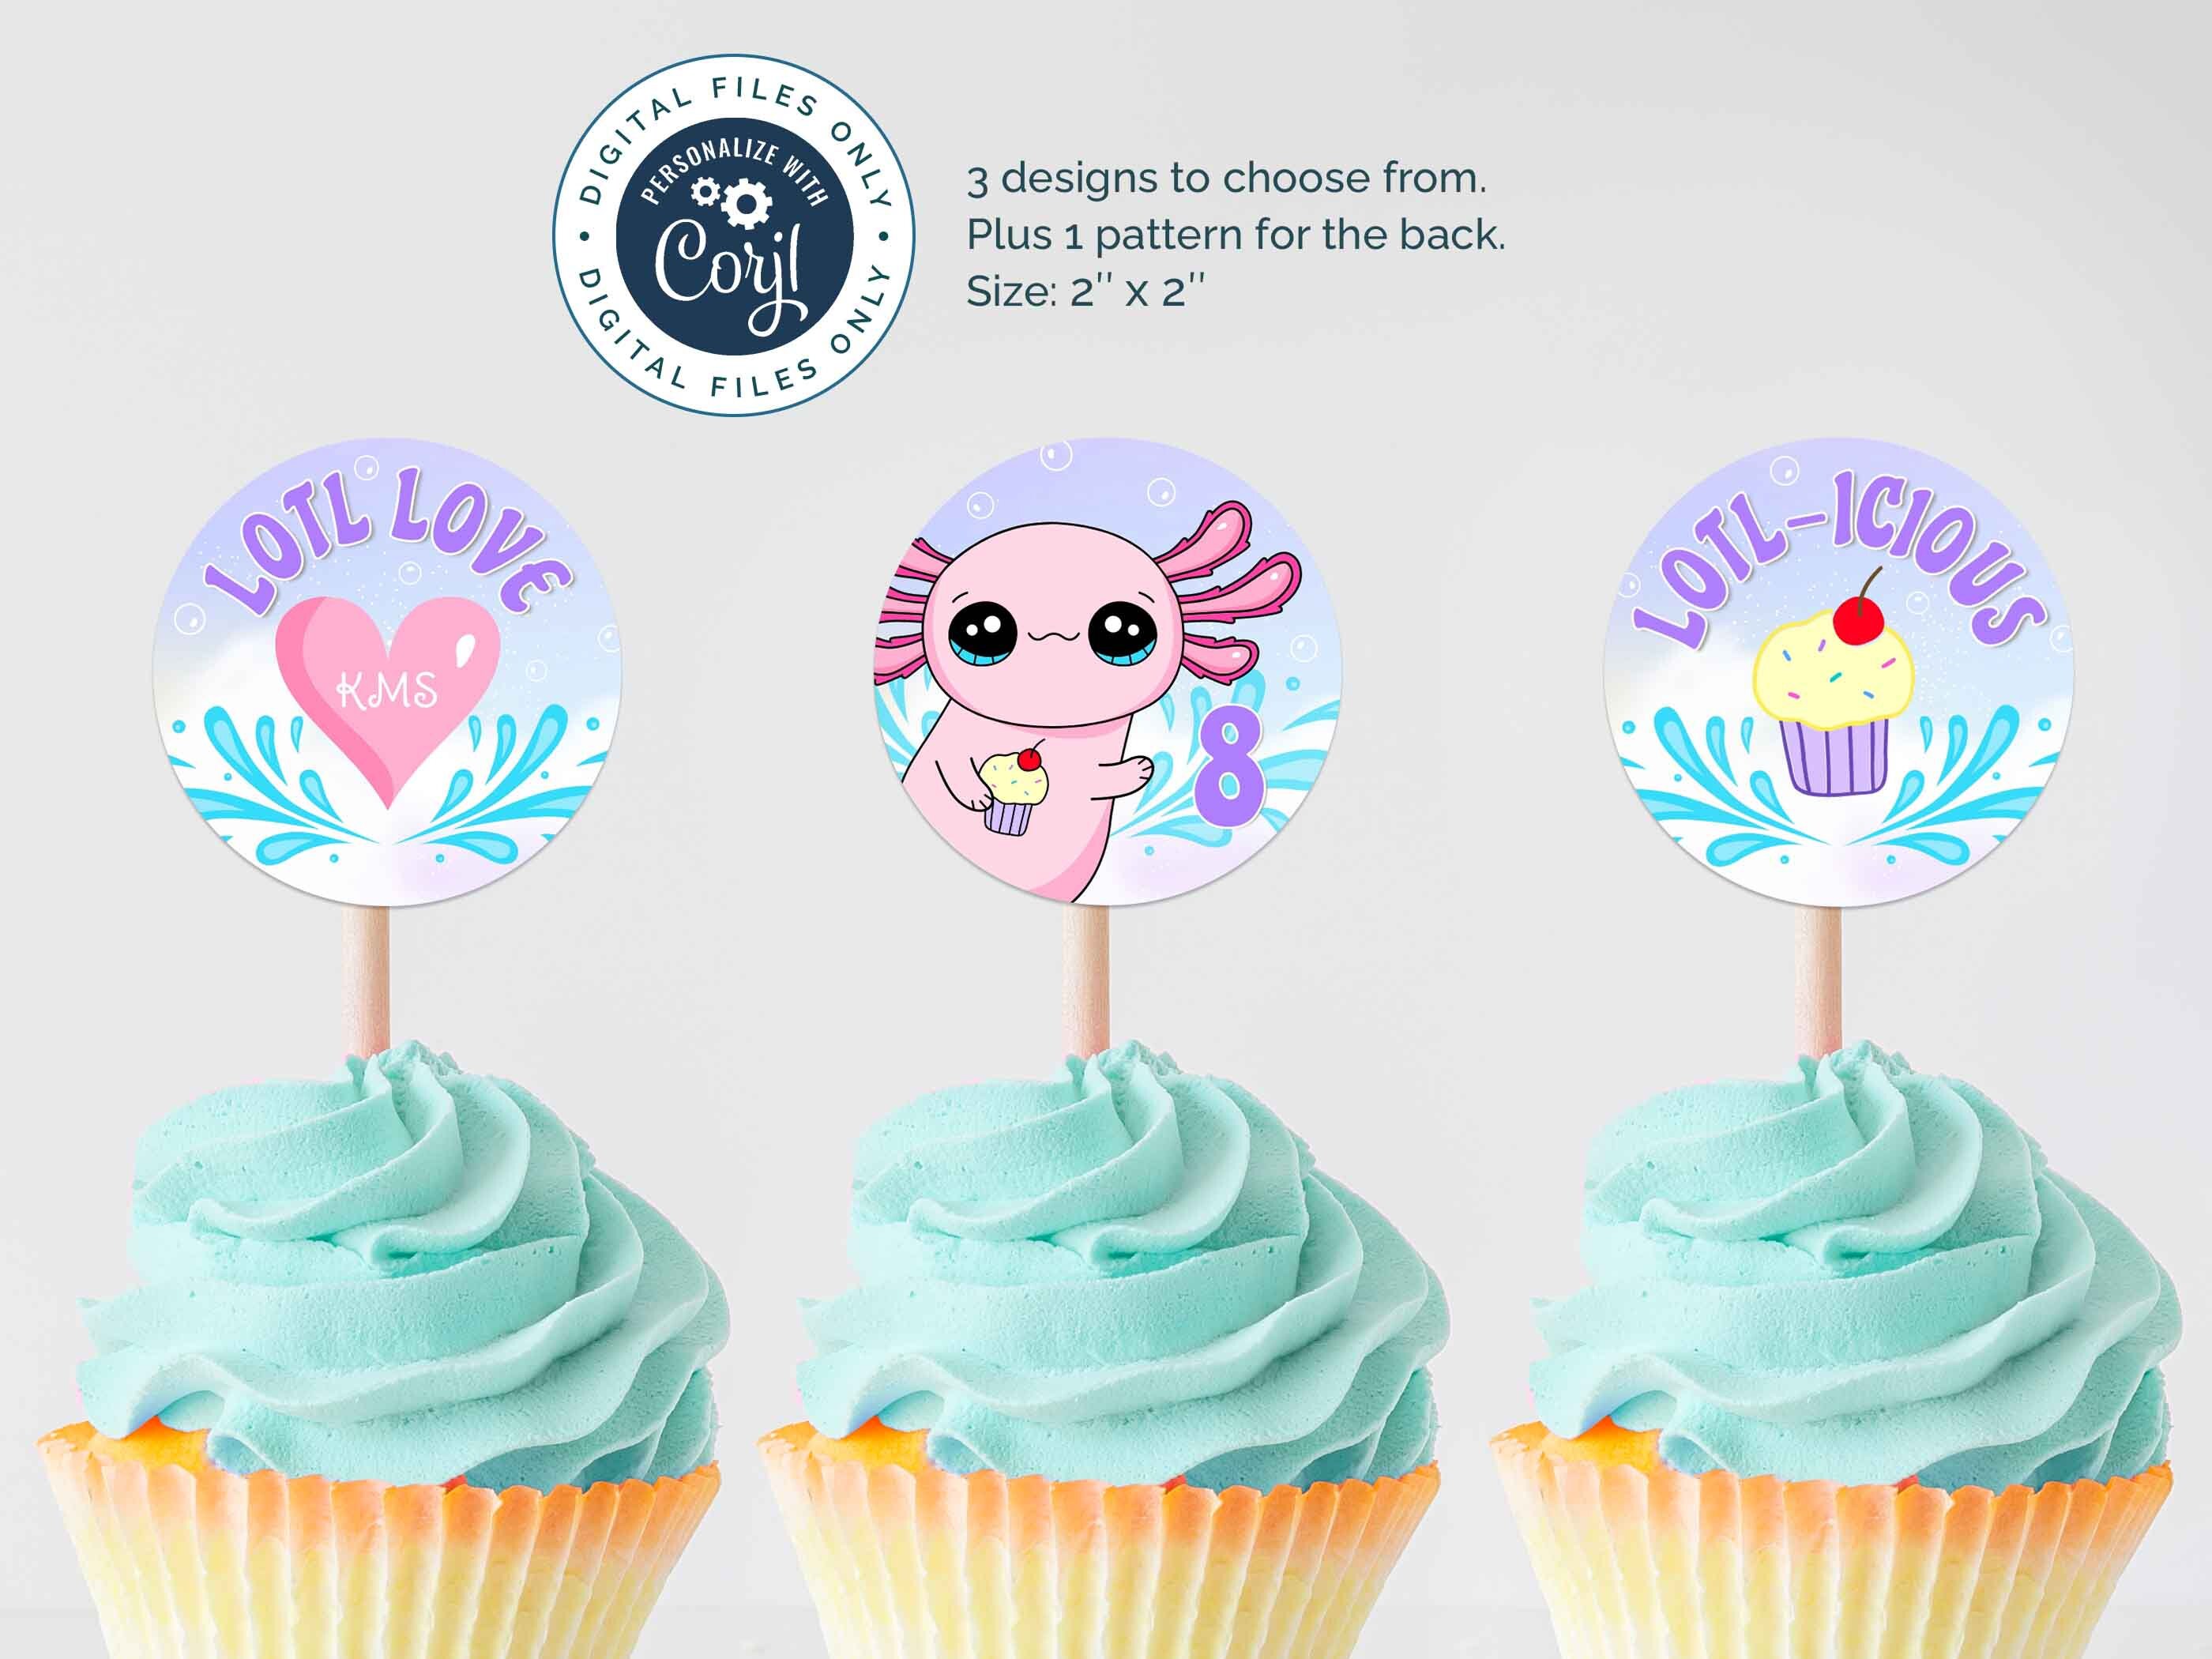 Axolotl Party Kit with Cake Topper